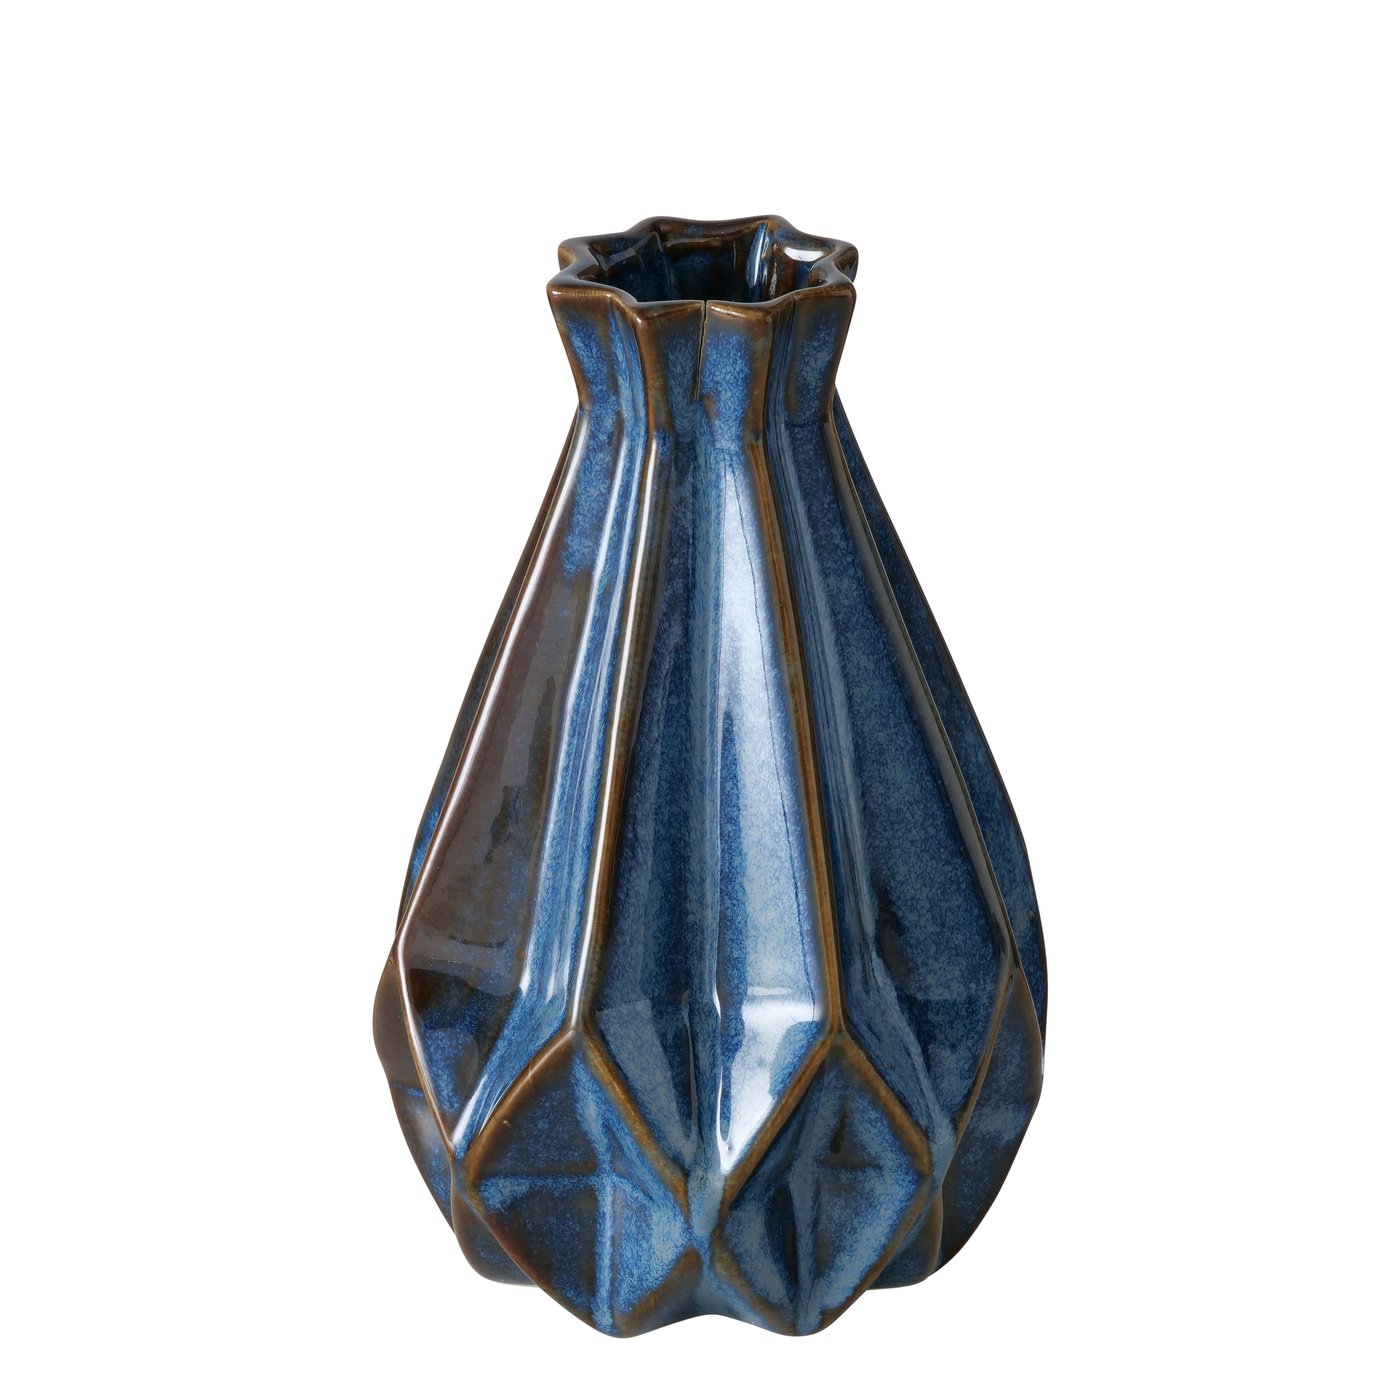 &Quirky Storma Folded Design Blue Vase